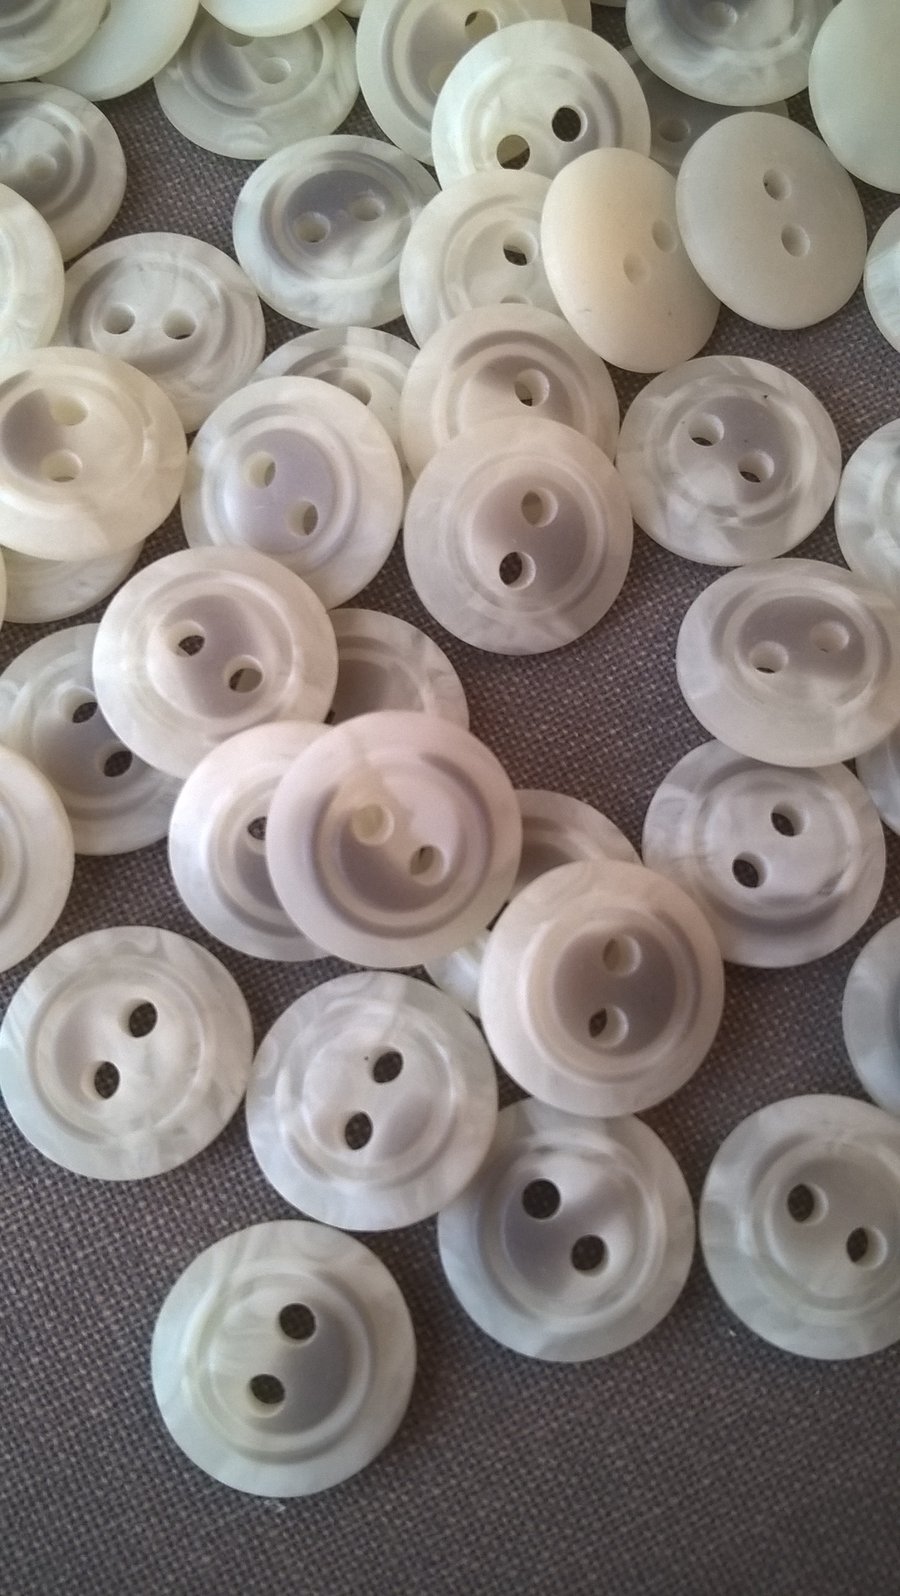 12mm grey and off-white small buttons 2-hole, pack of 50